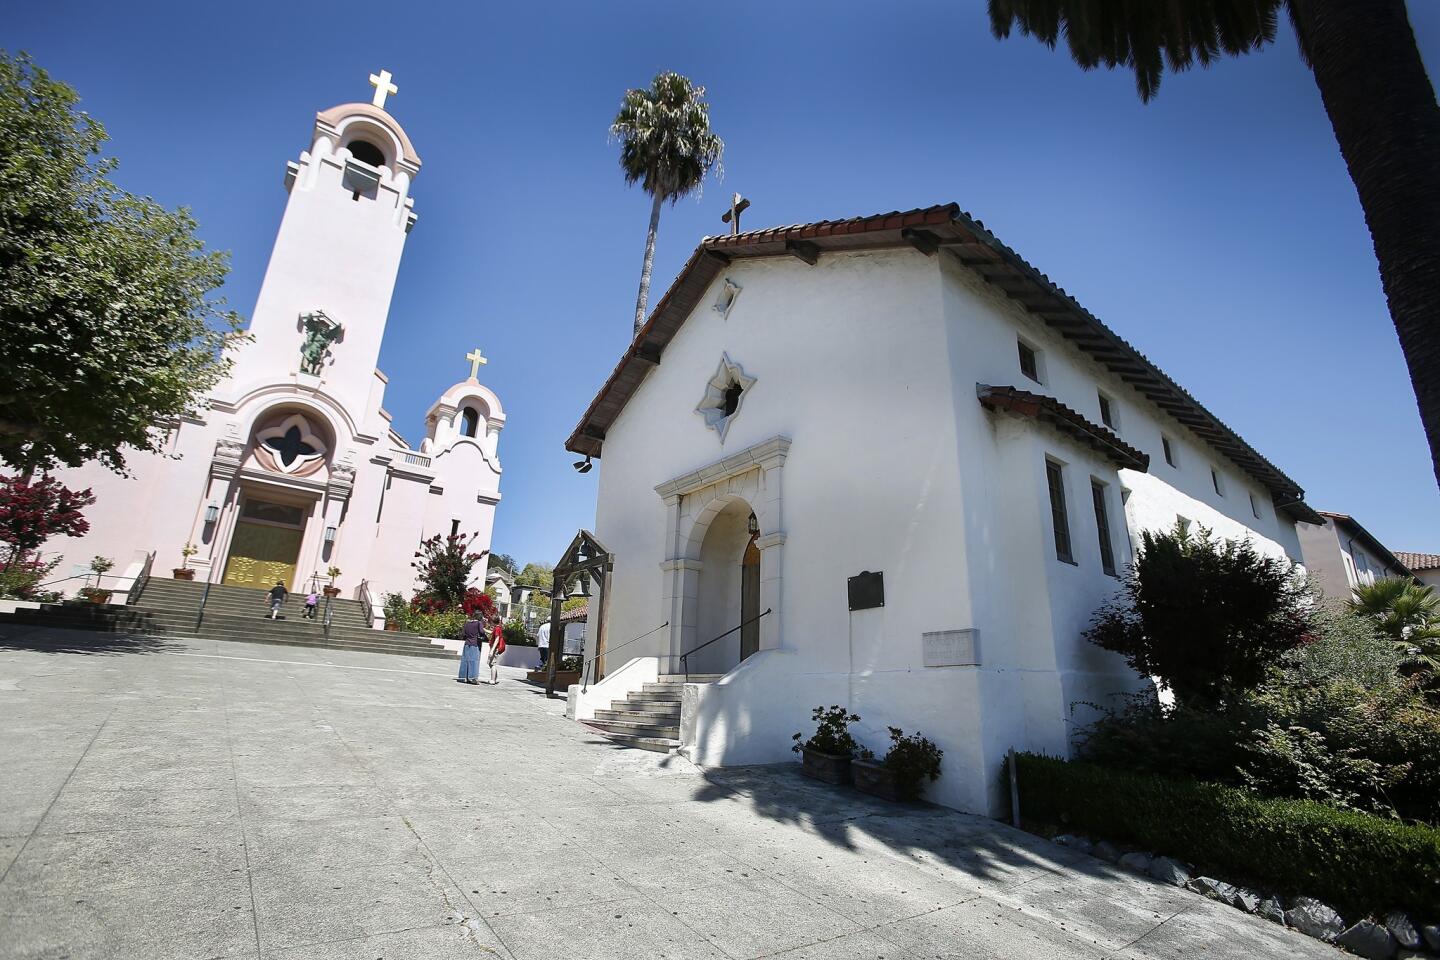 Mission San Rafael Arcángel was originally used as a hospital for Native Americans. The mission chapel, right, was rebuilt in 1949 next to a church built on the site of the original chapel.